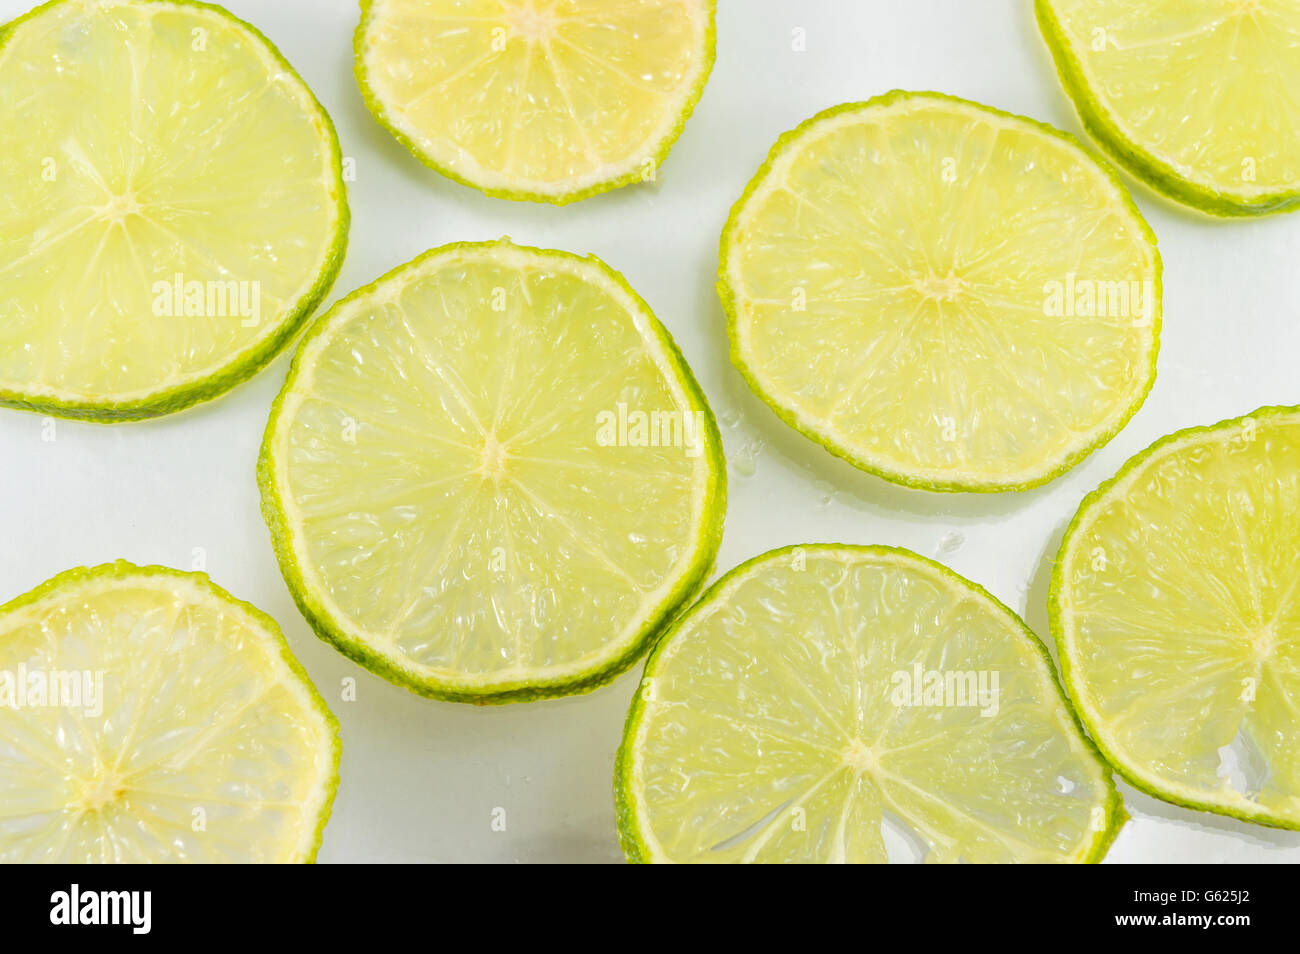 Lime fruit sliced and placed on a white table Stock Photo